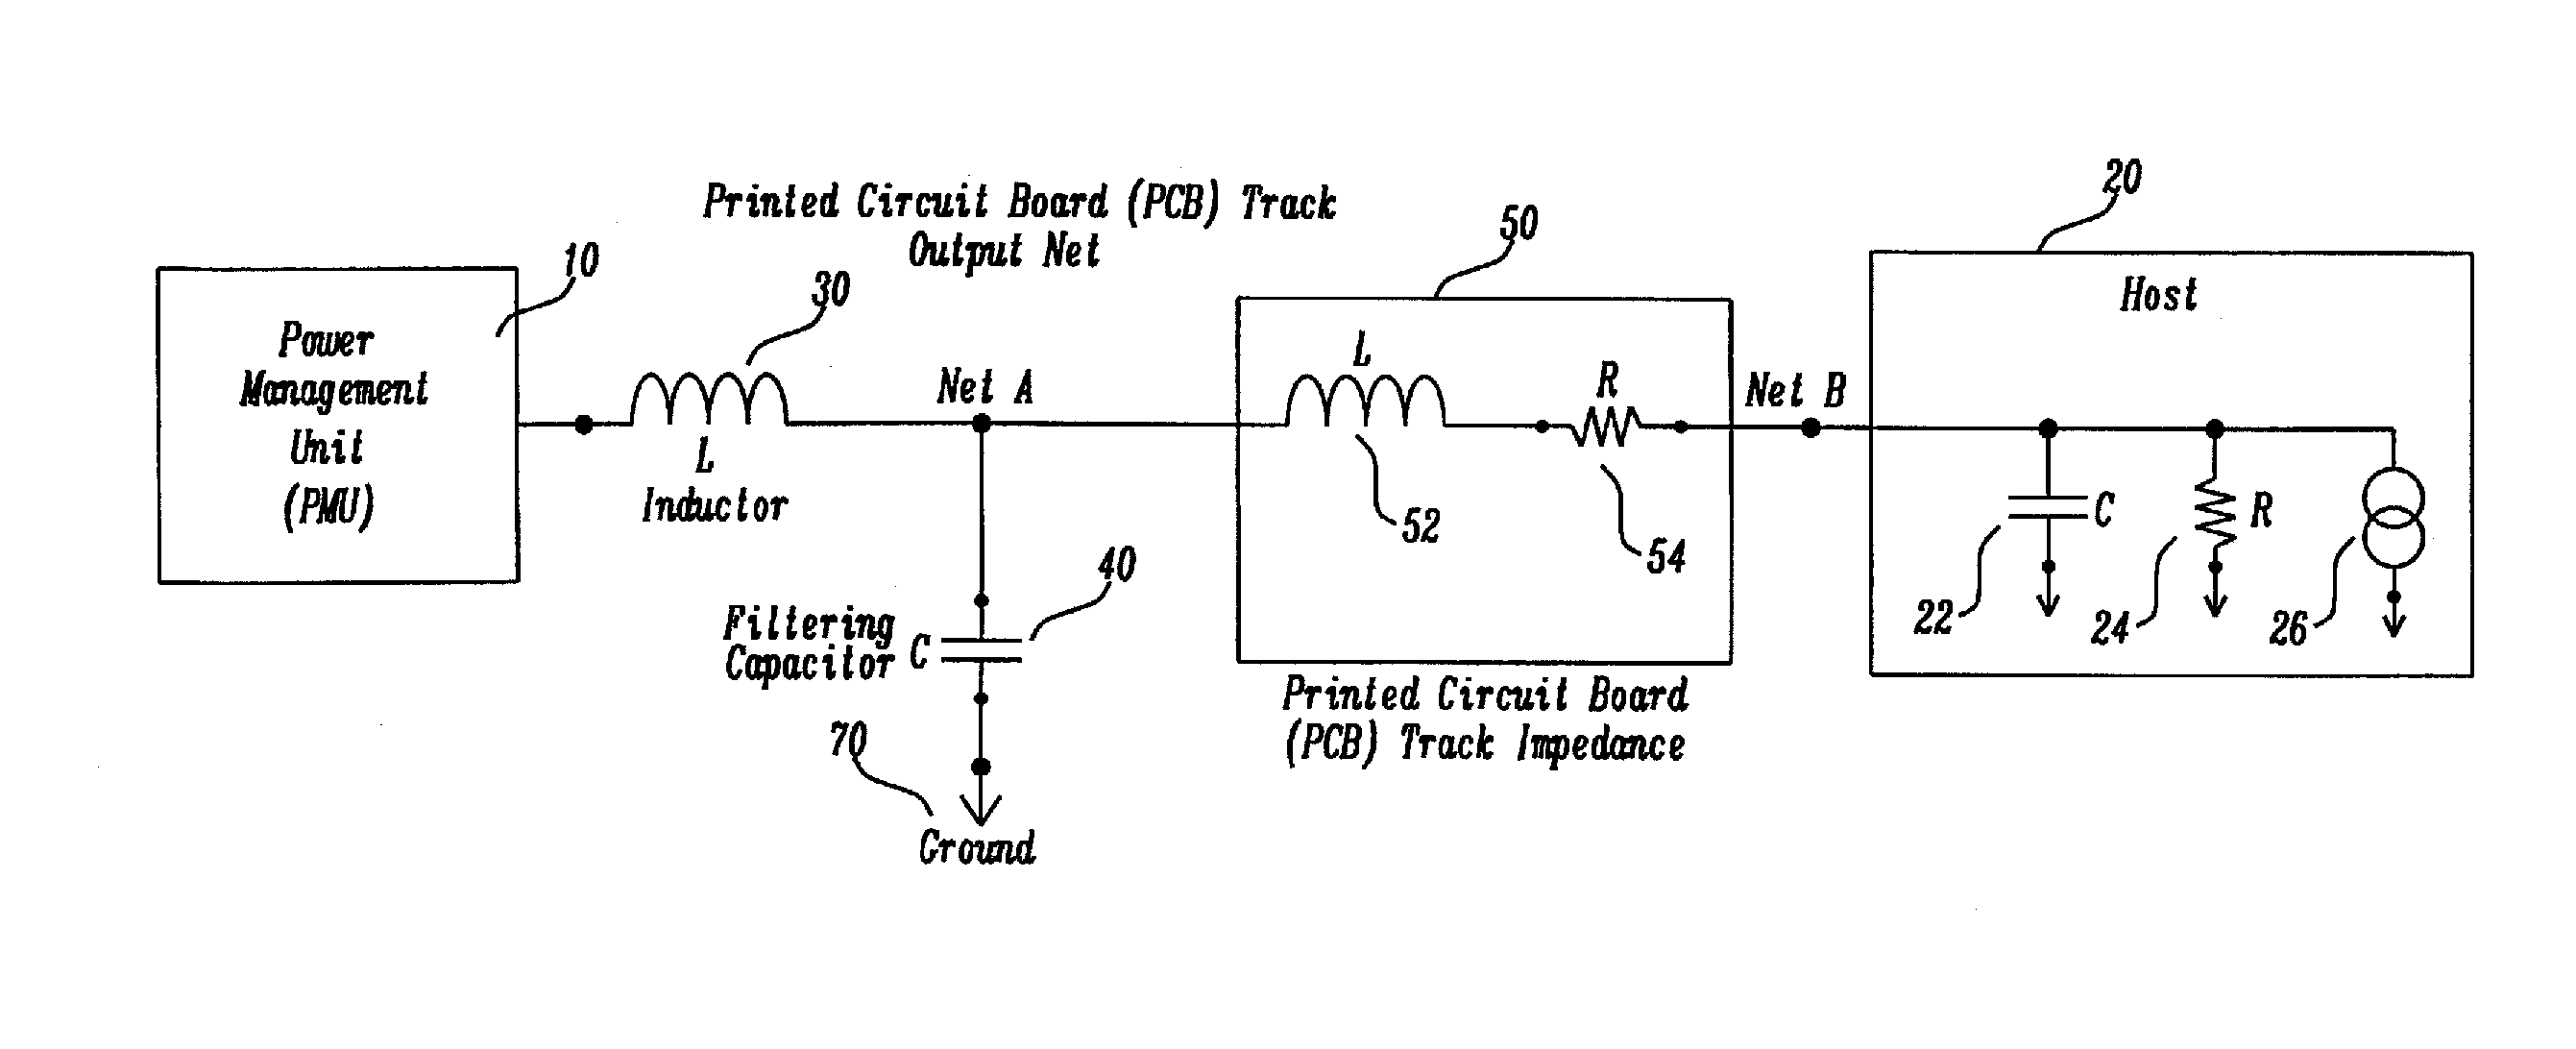 Apparatus, System and Method for Voltage Regulator with an Improved Voltage Regulation Using a Remote Feedback Loop and Filter